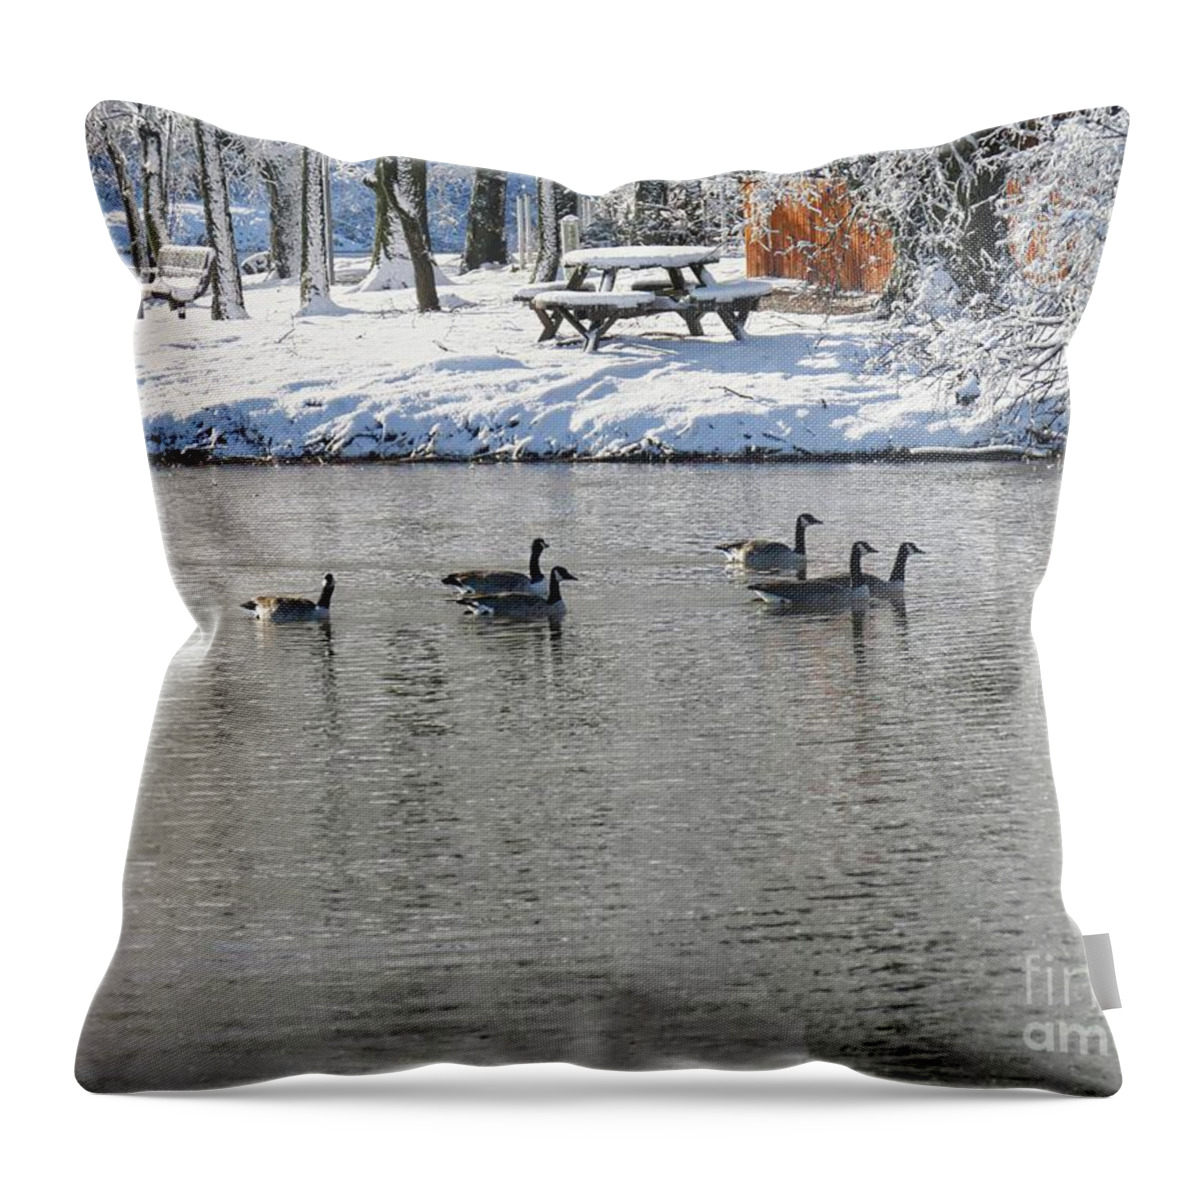 Background Throw Pillow featuring the photograph Winter Picnic by On da Raks